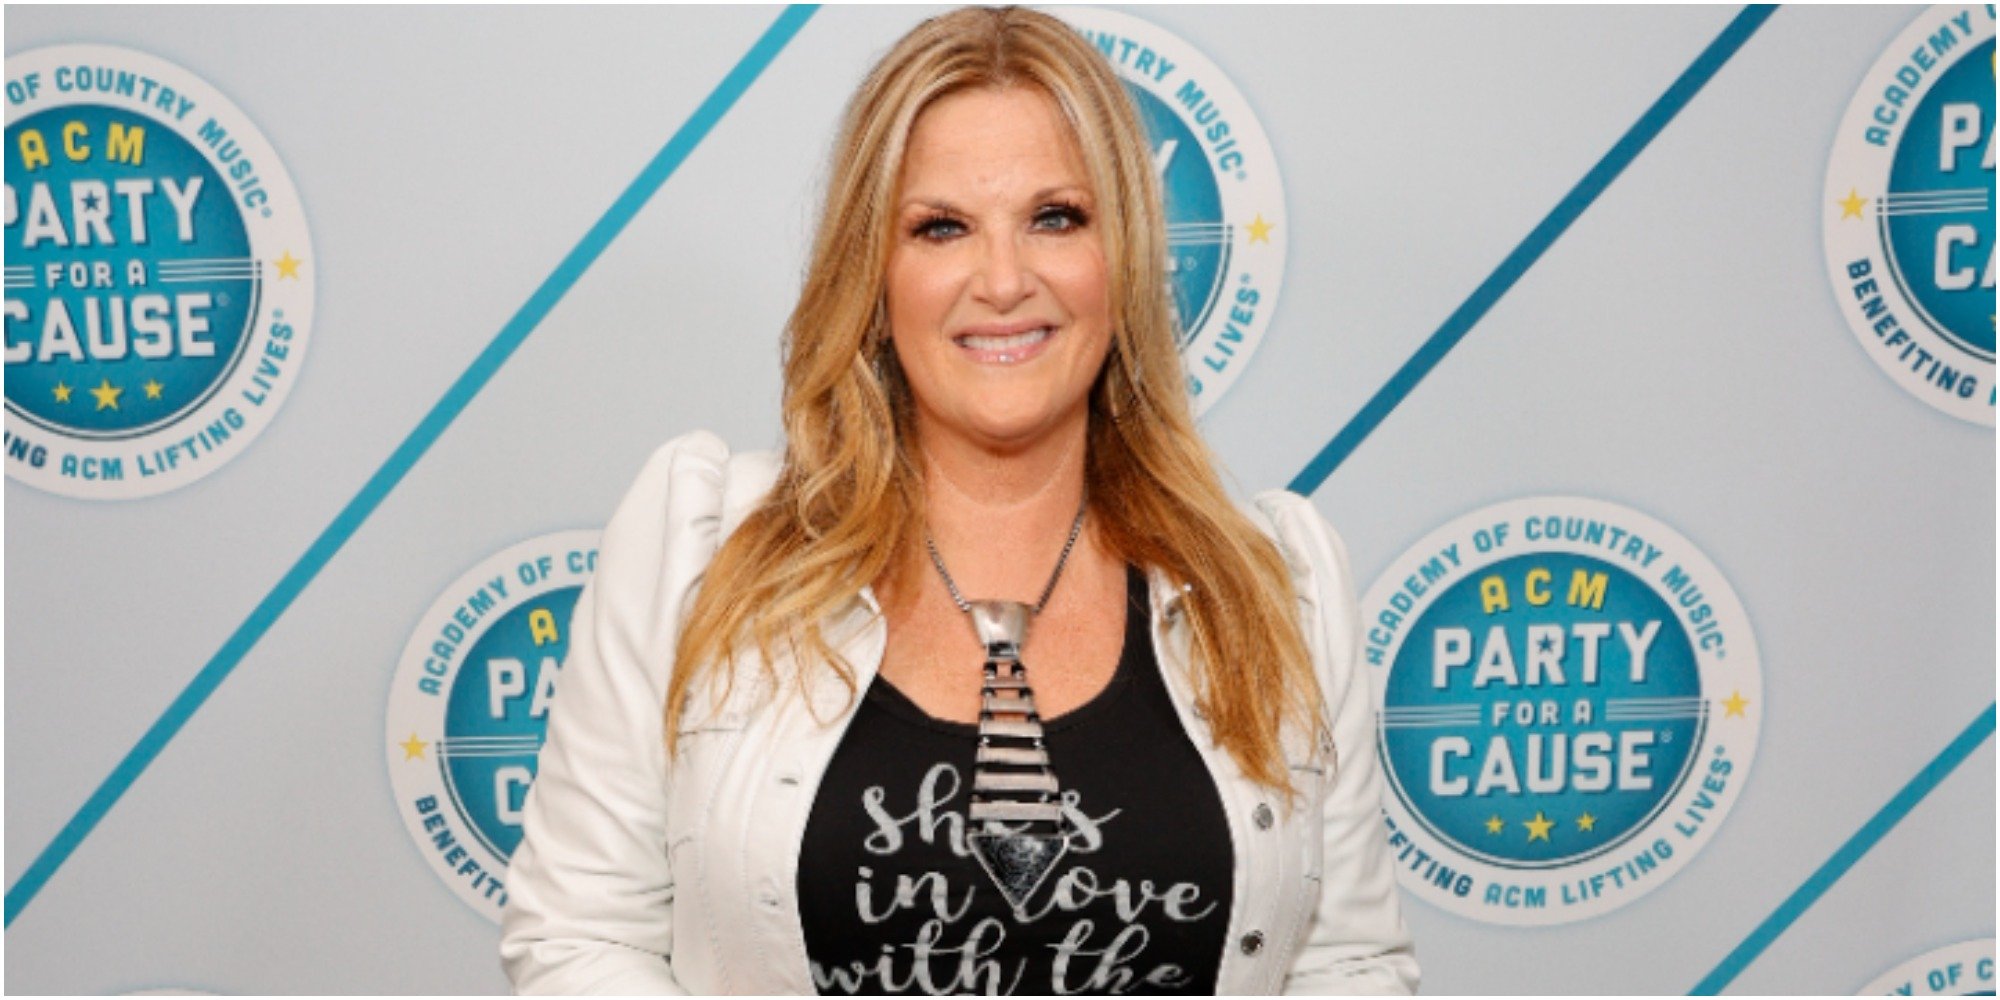 trisha yearwood smiles for the cameras on the red carpet.